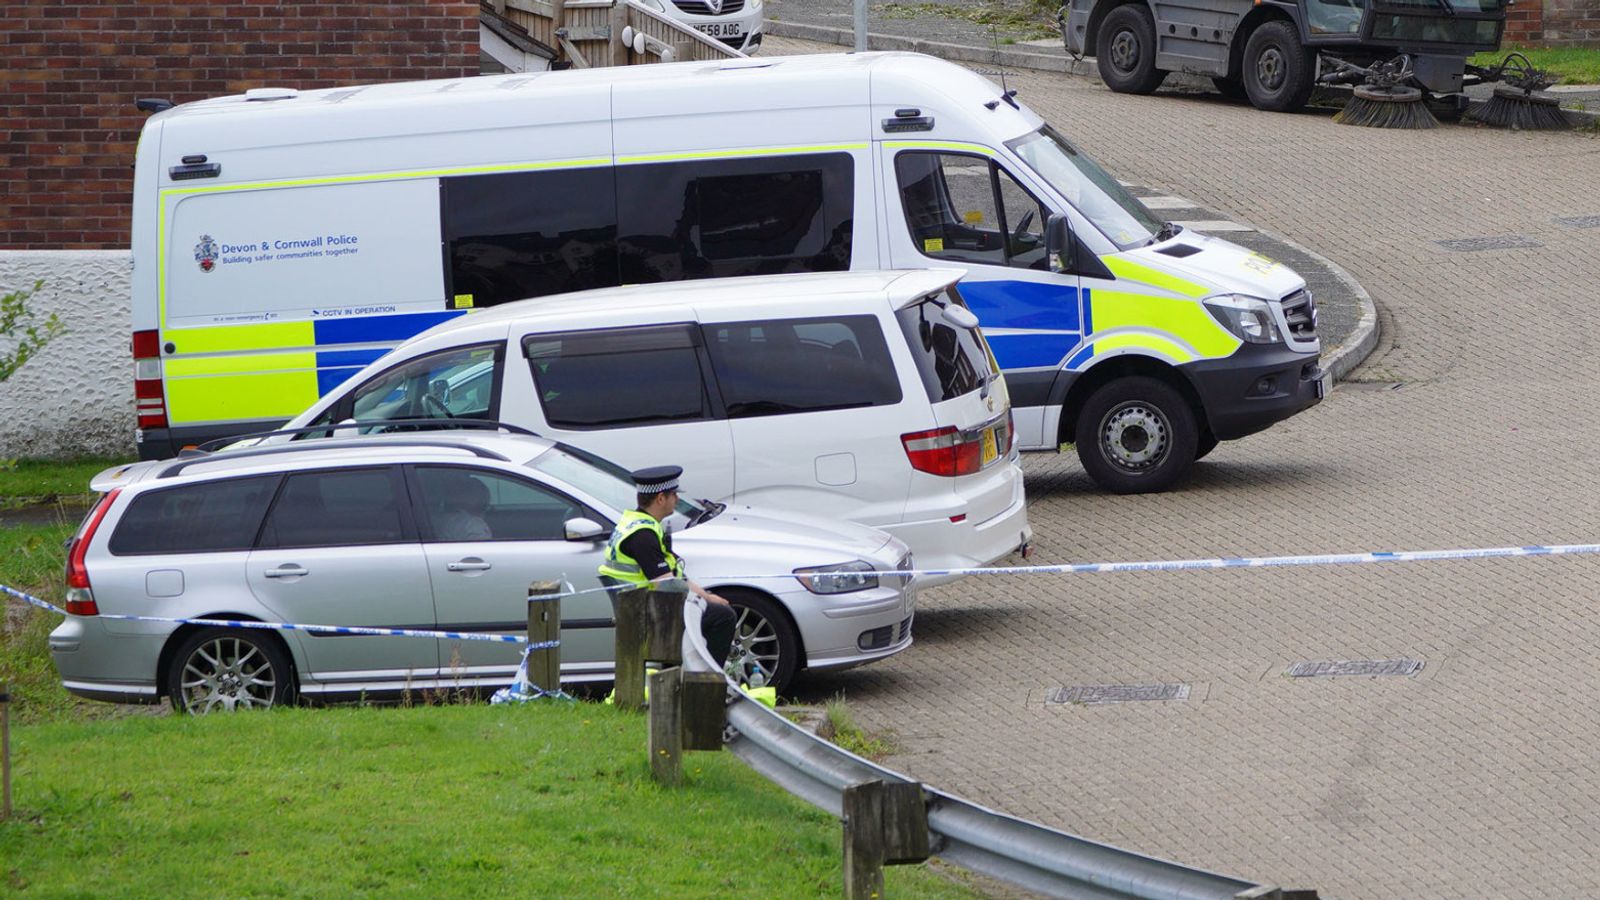 Plymouth shooting: 'Catastrophic' failings at Devon and Cornwall Police before deadly attack - what the inquest jury said